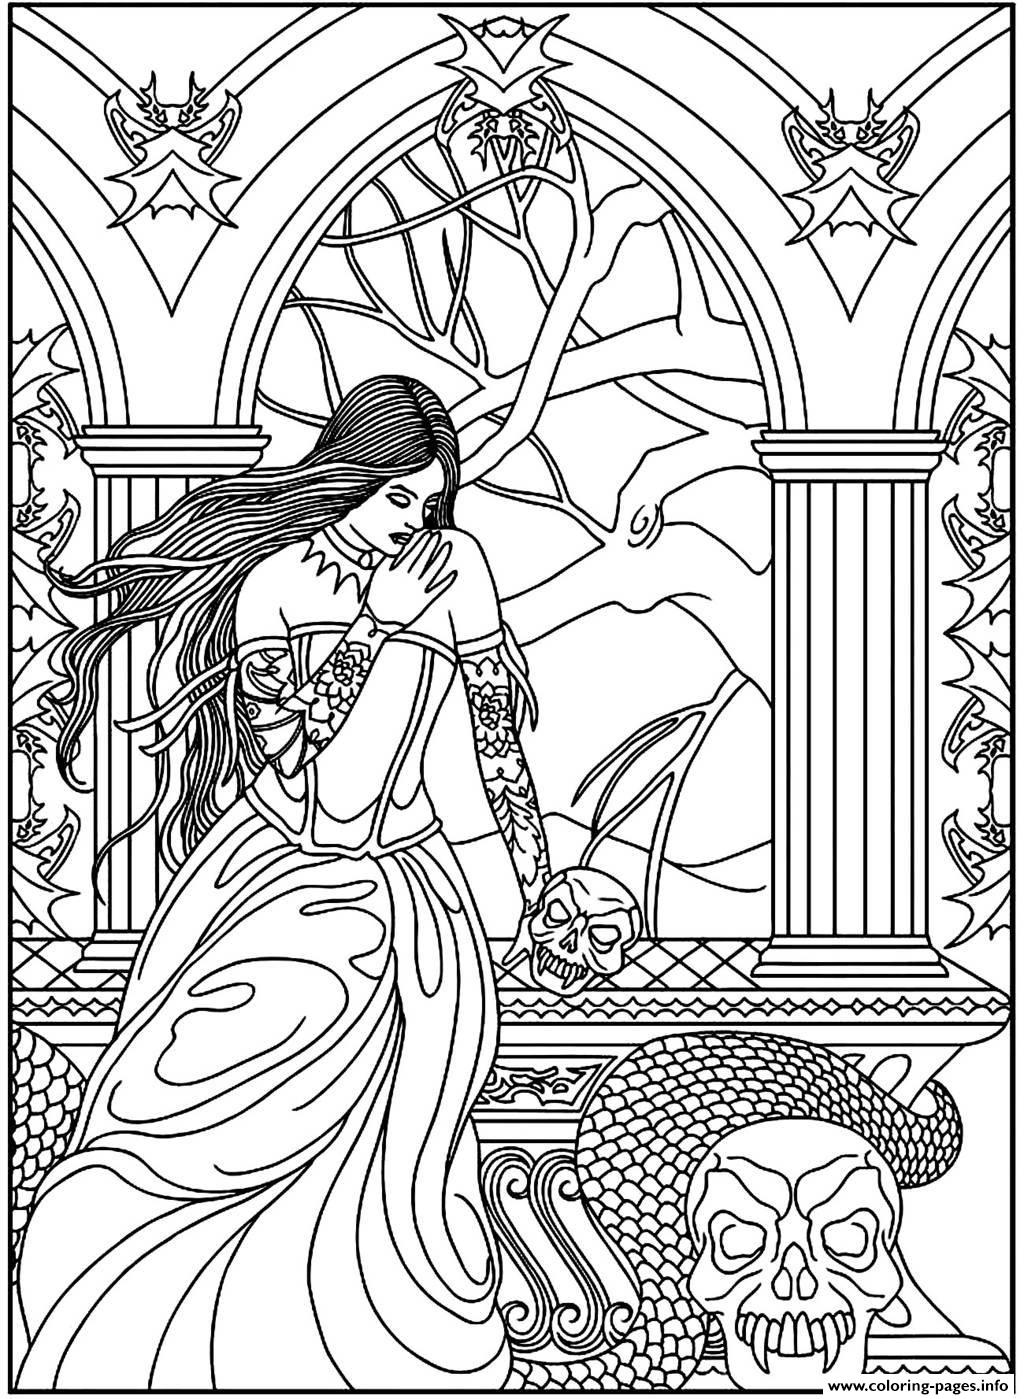 Adult Fantasy Woman Skulls Snake coloring pages